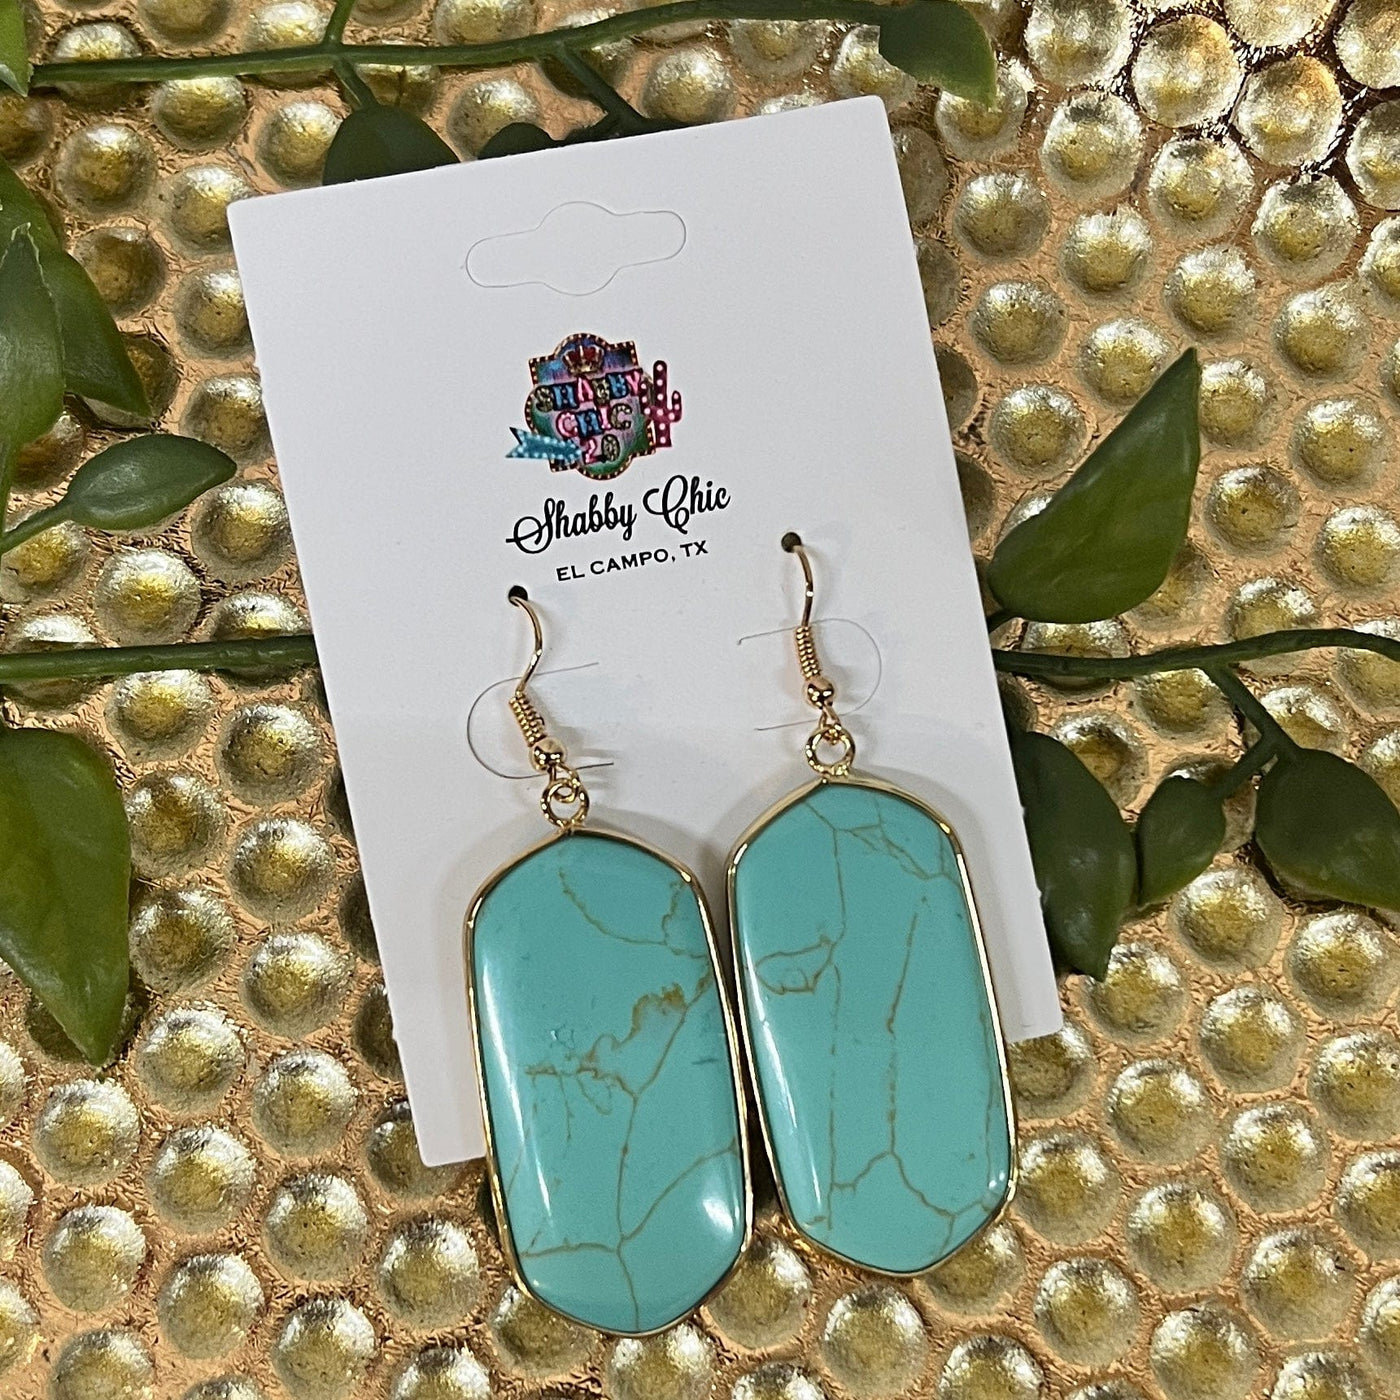 Just What We Thought Earrings Shabby Chic Boutique and Tanning Salon Turquoise